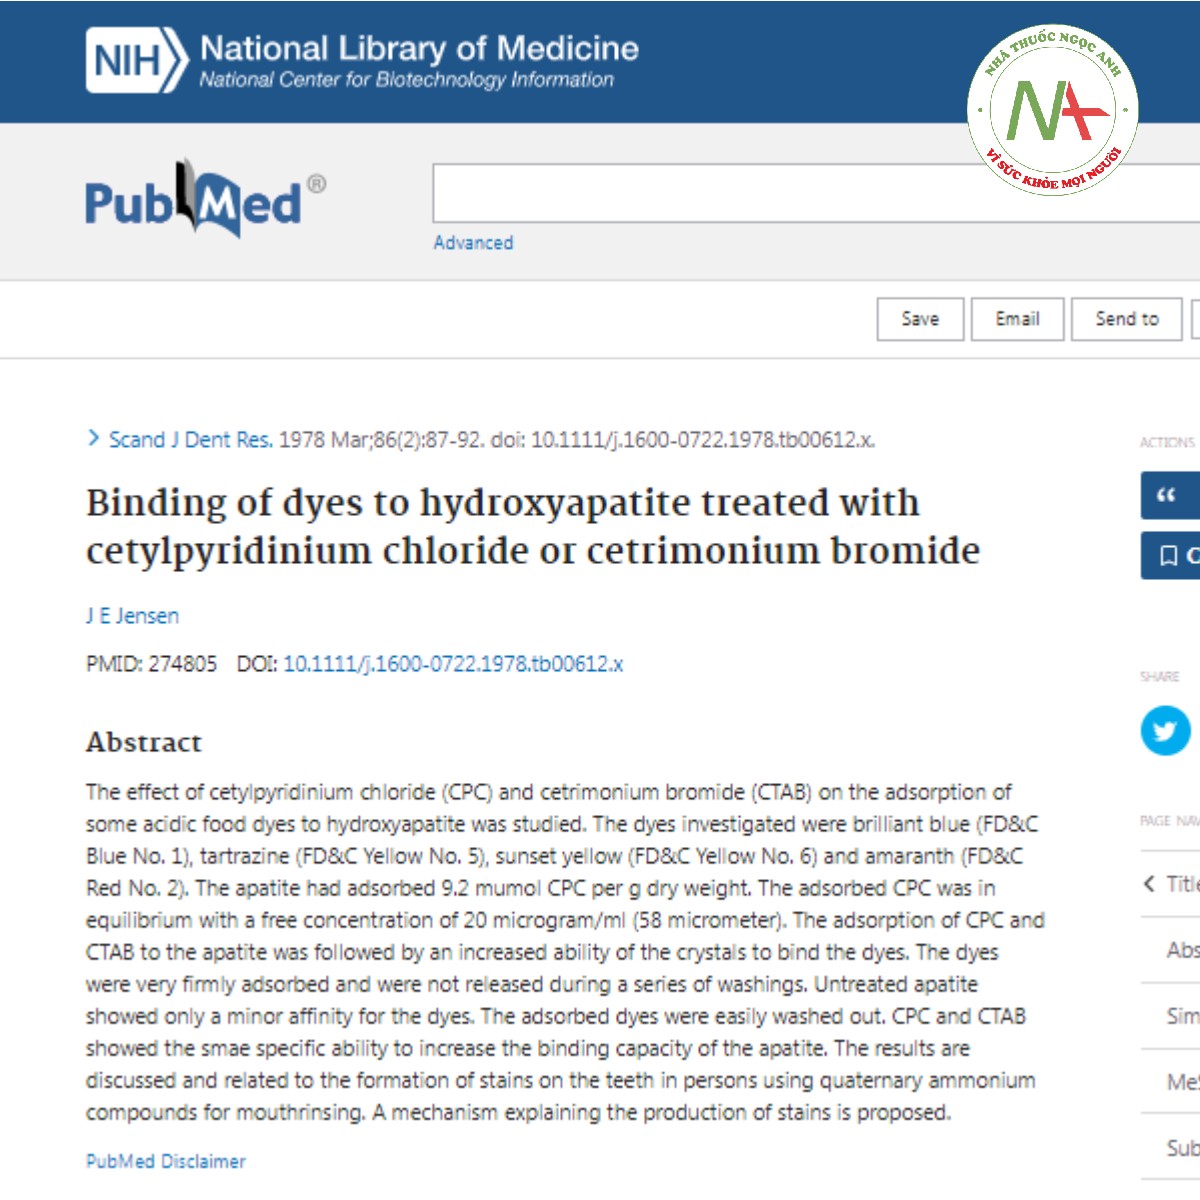 Binding of dyes to hydroxyapatite treated with cetylpyridinium chloride or cetrimonium bromide